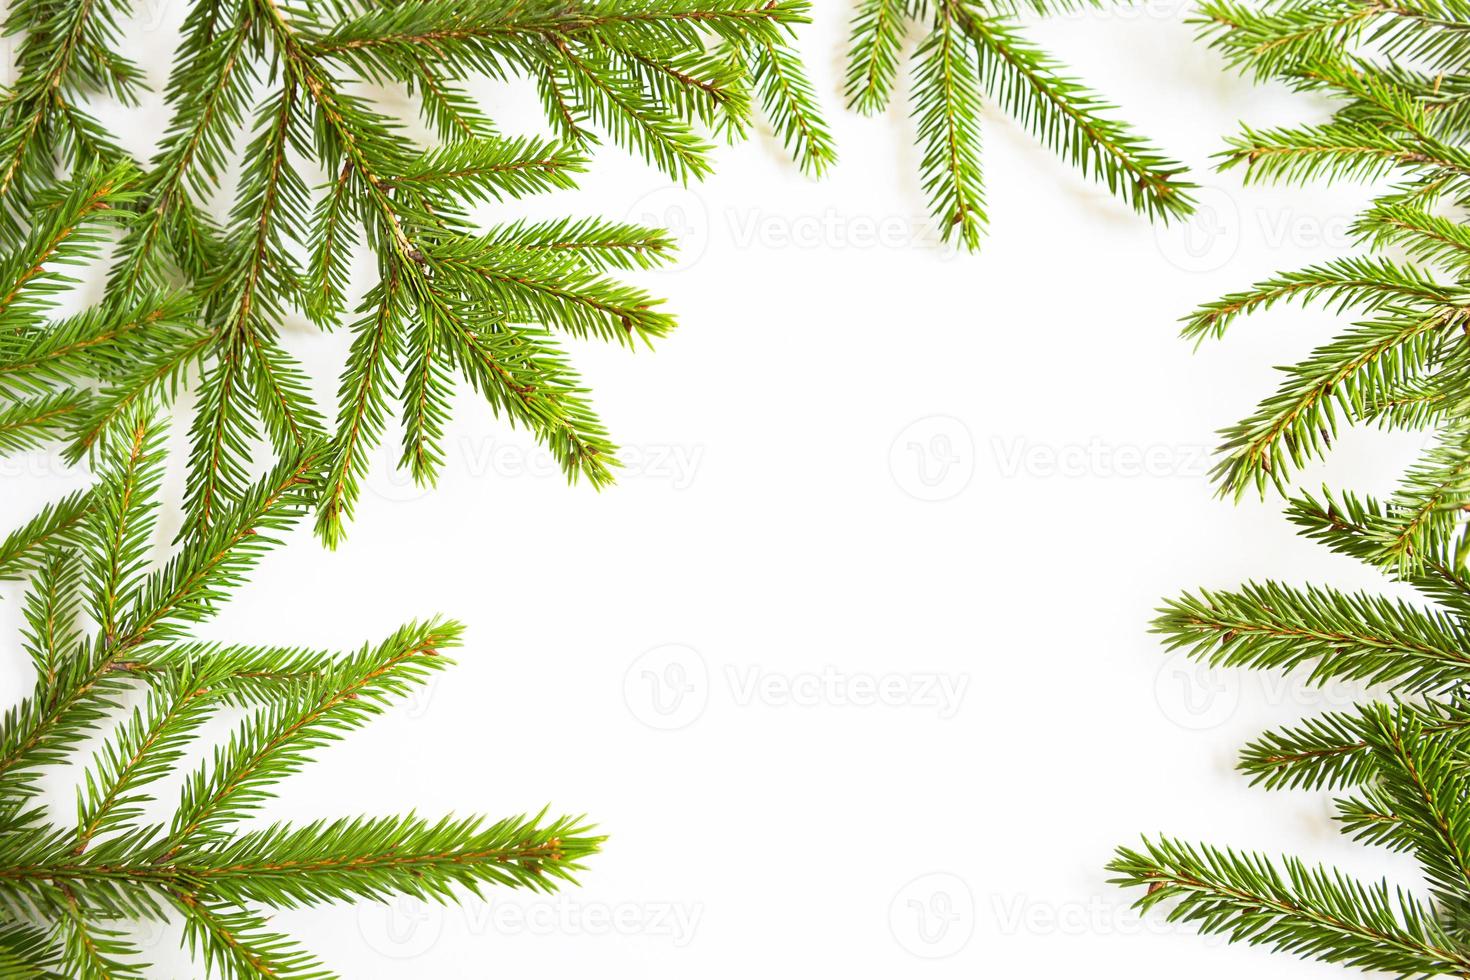 Natural frame of fresh green spruce branches on a white background. Christmas, new year, Christmas tree. Copy space photo